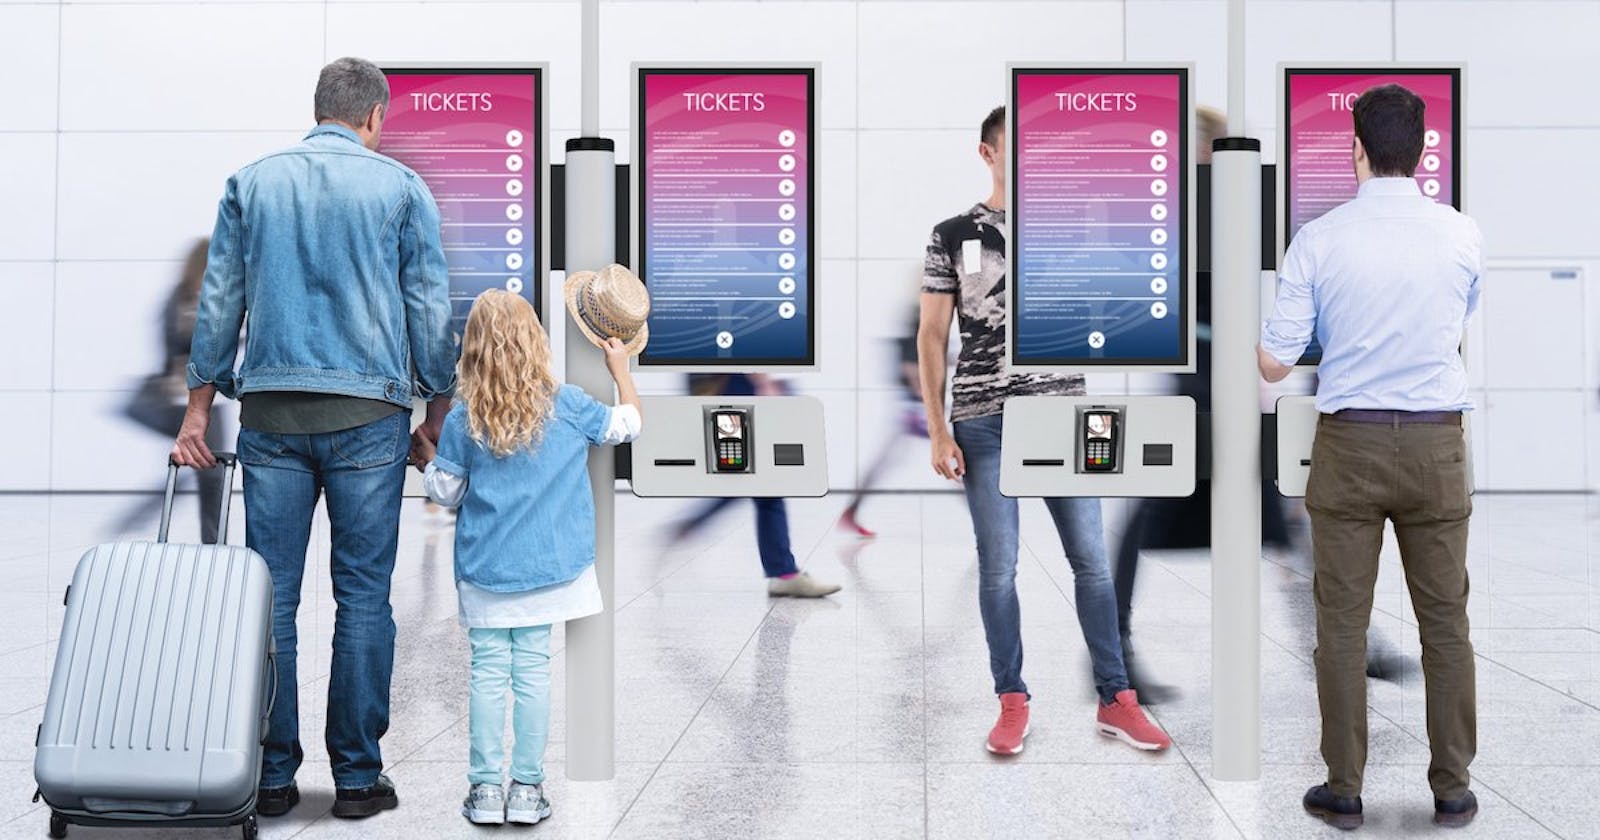 The Top 9 Kiosk Instances Your Company Should Be Aware of